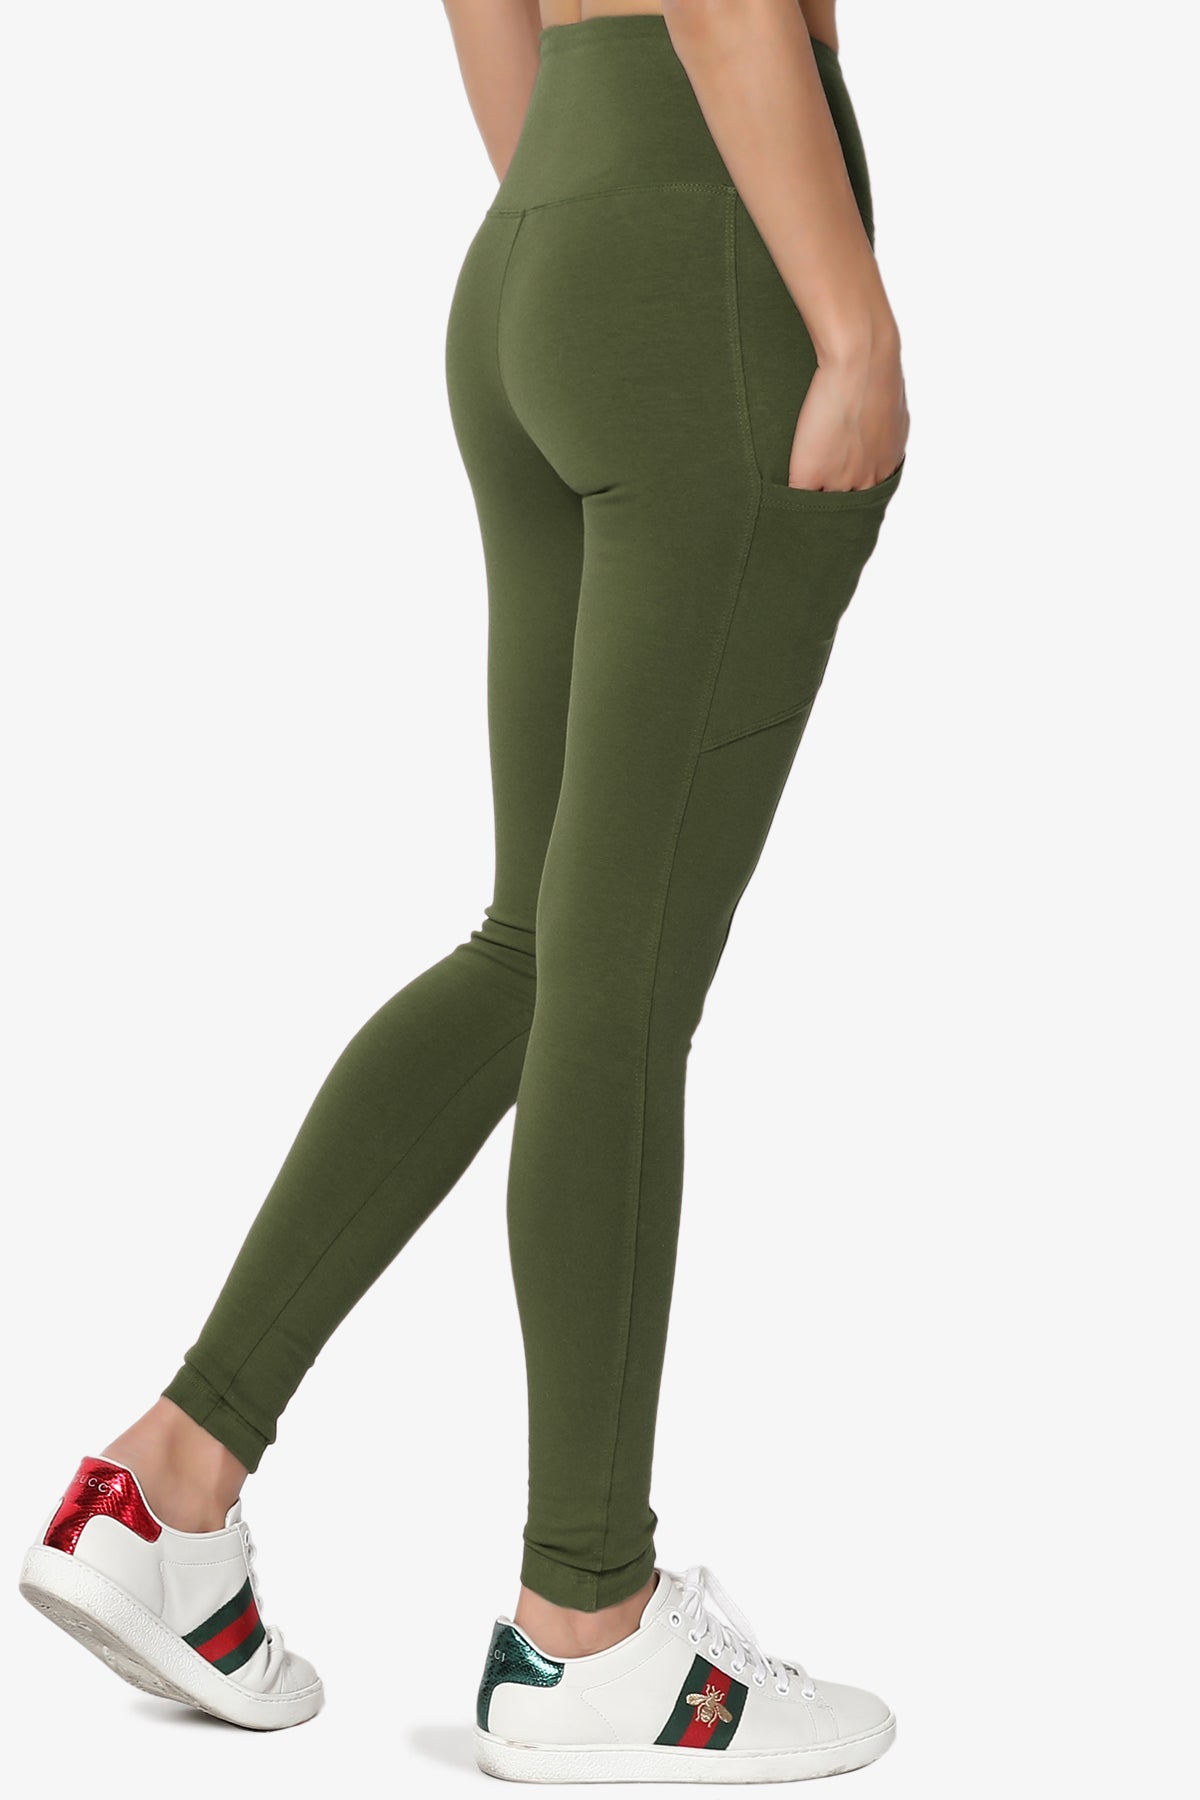 Load image into Gallery viewer, Ansley Luxe Cotton Leggings with Pockets ARMY GREEN_4
